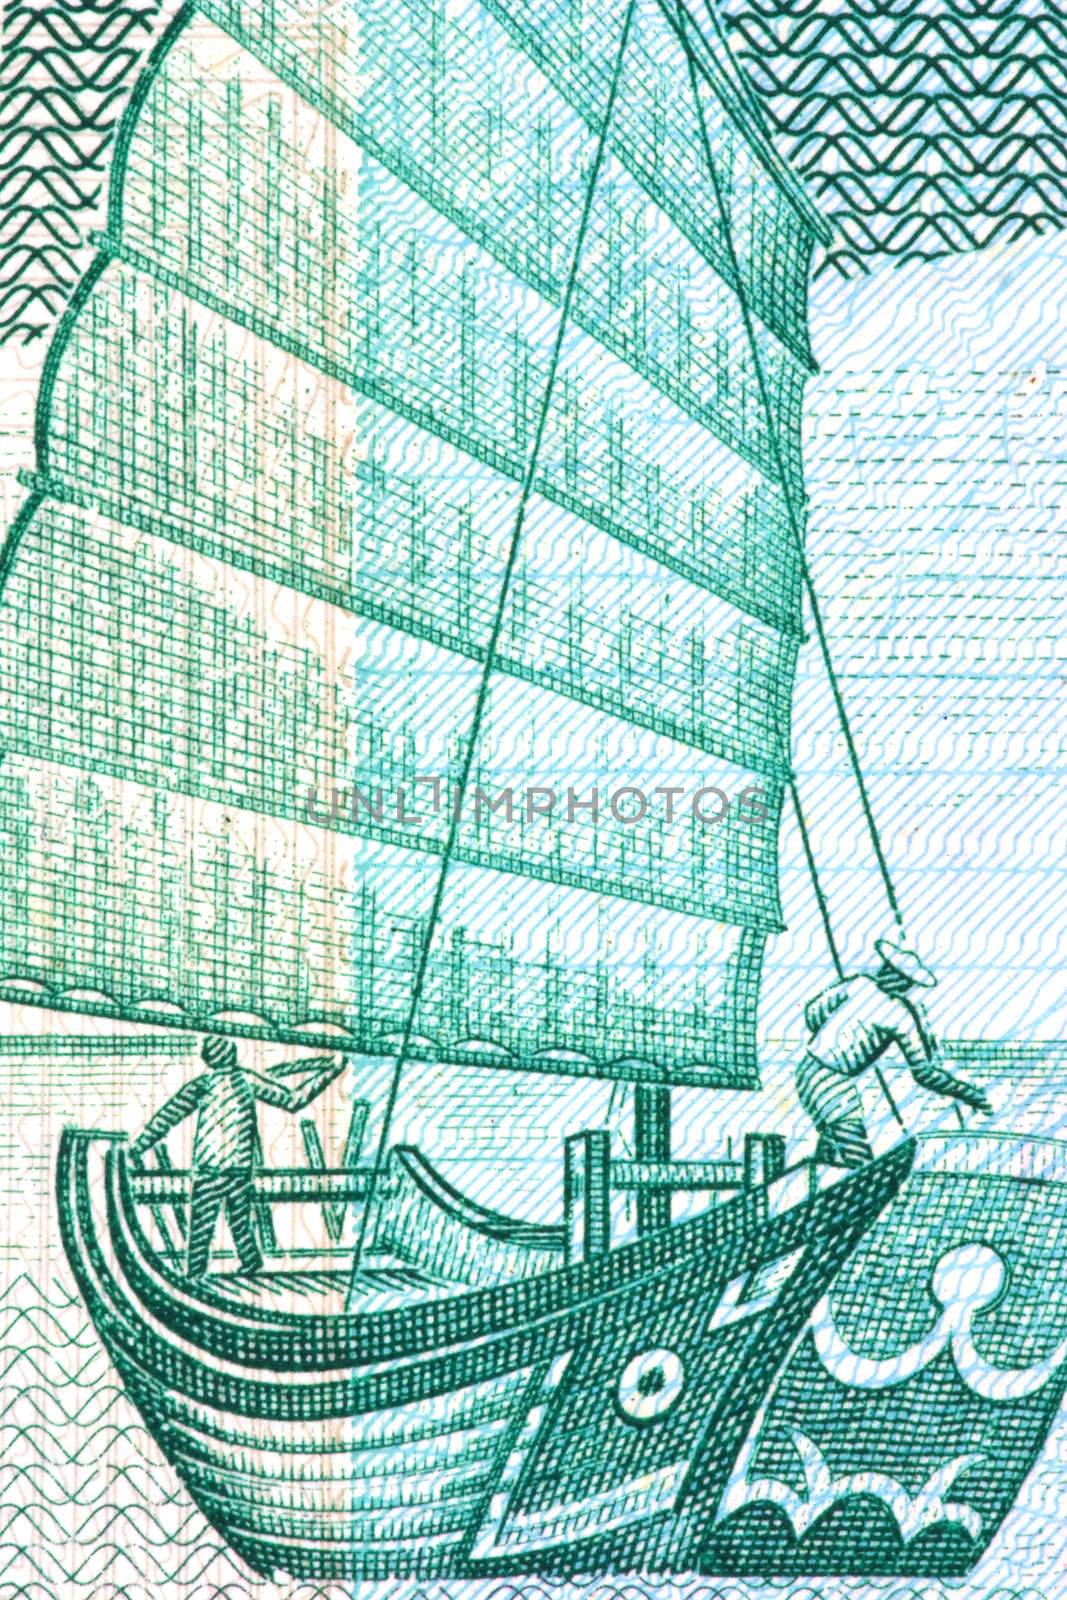 Macro image of a chinese junk on a currency note.